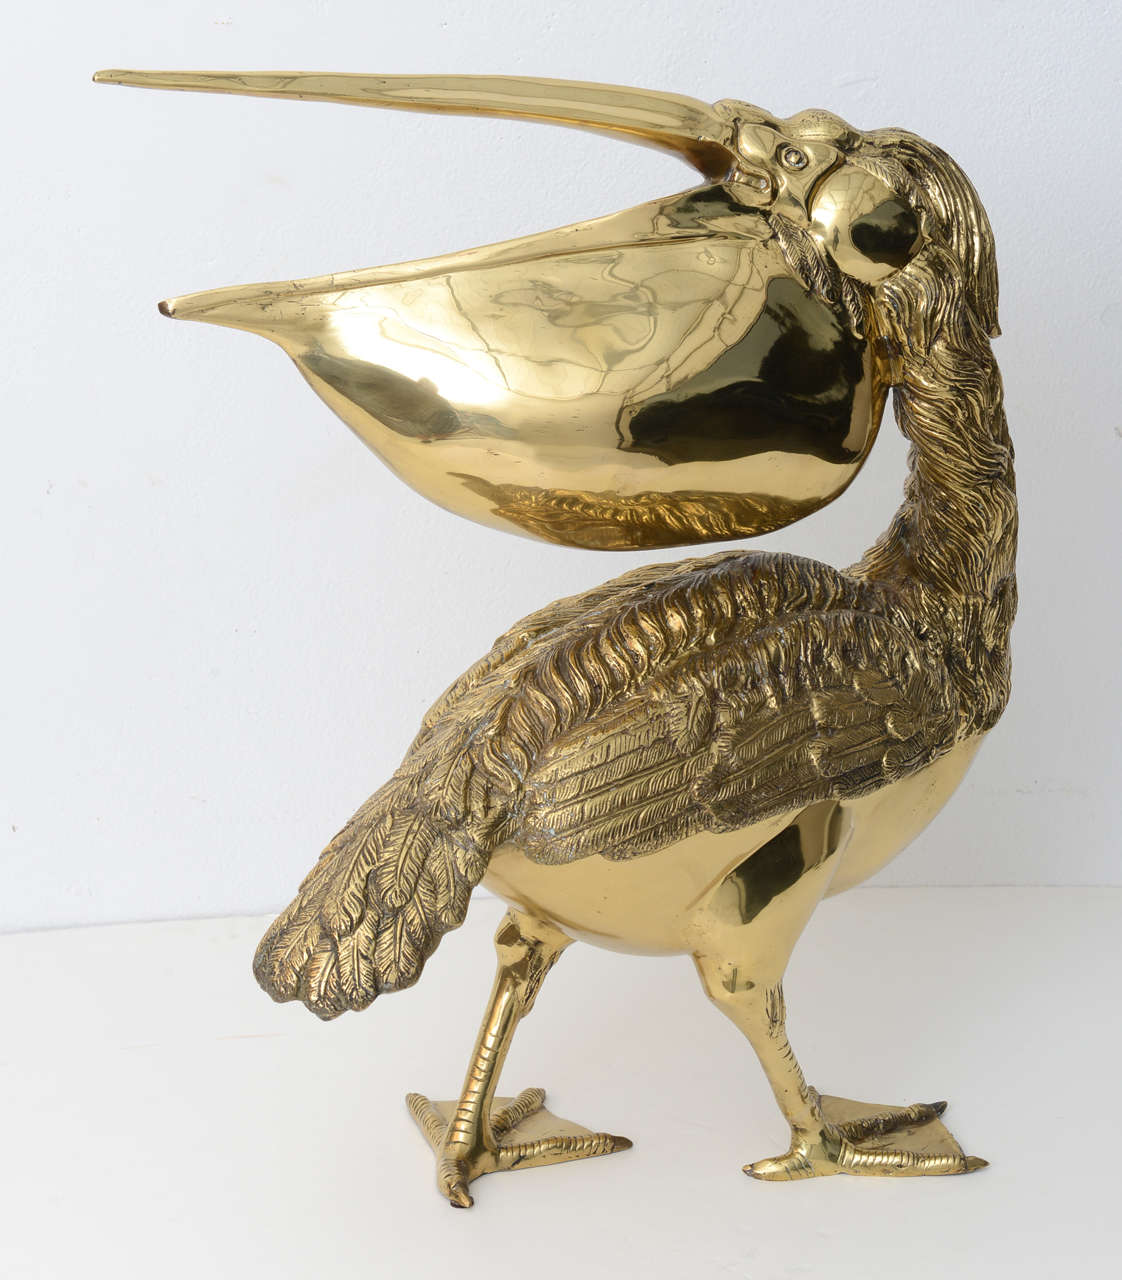 This stylish sculpture of a pelican will make the perfect addition to your home for a bit of the exotic and glamor of the Hollywood Regency, Boho look.

Please feel free to contact us directly for a shipping quote or any additional information by